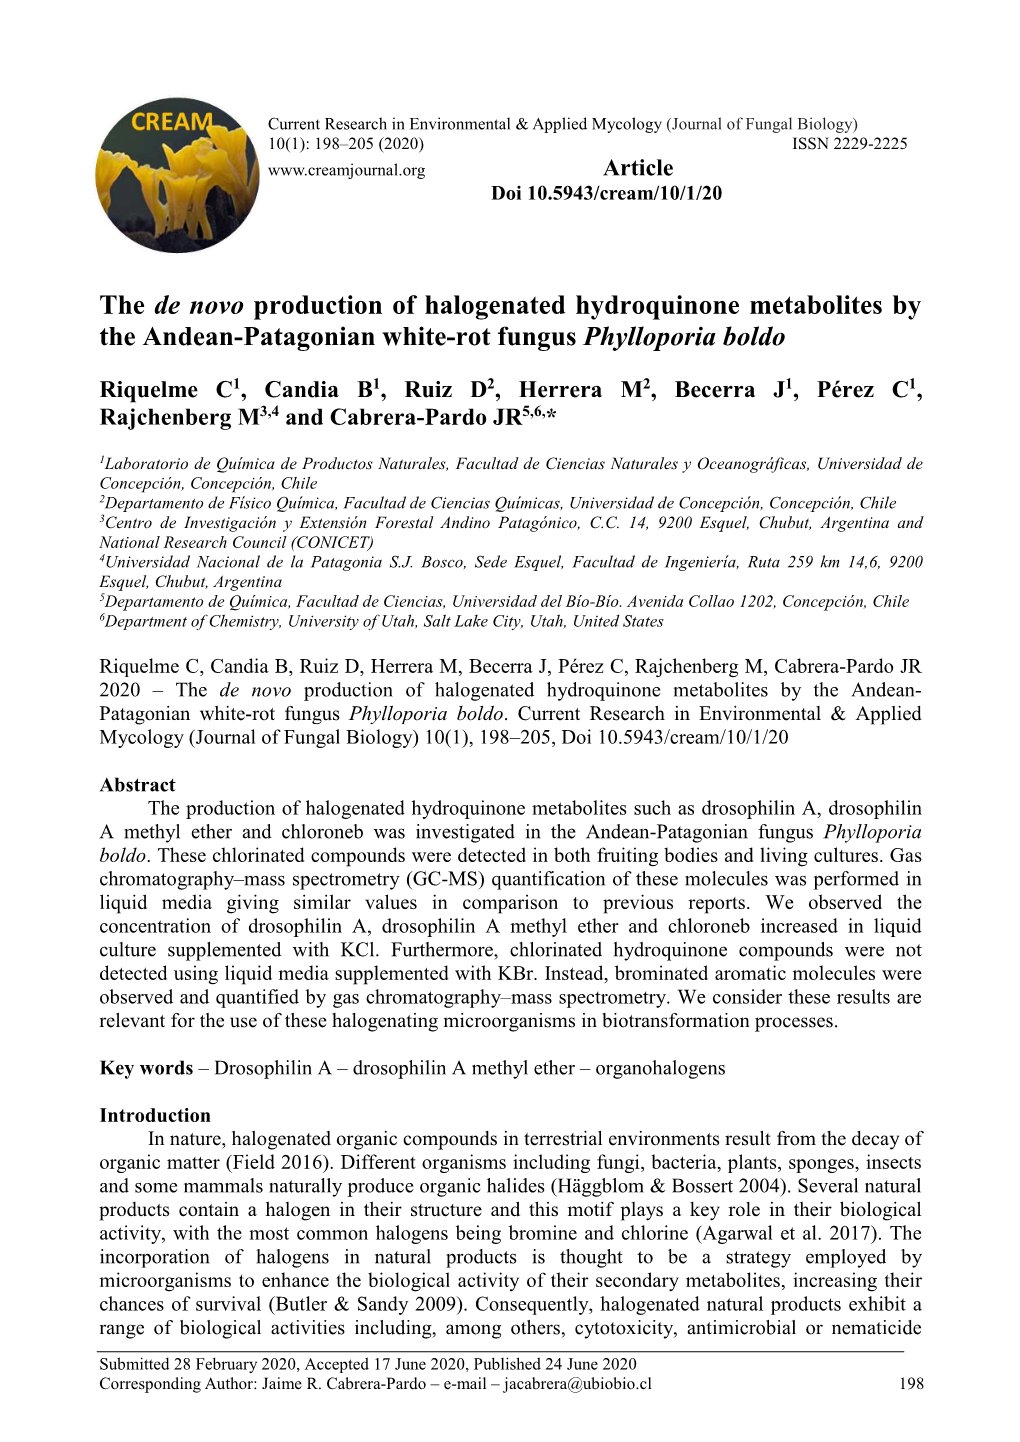 The De Novo Production of Halogenated Hydroquinone Metabolites by the Andean-Patagonian White-Rot Fungus Phylloporia Boldo